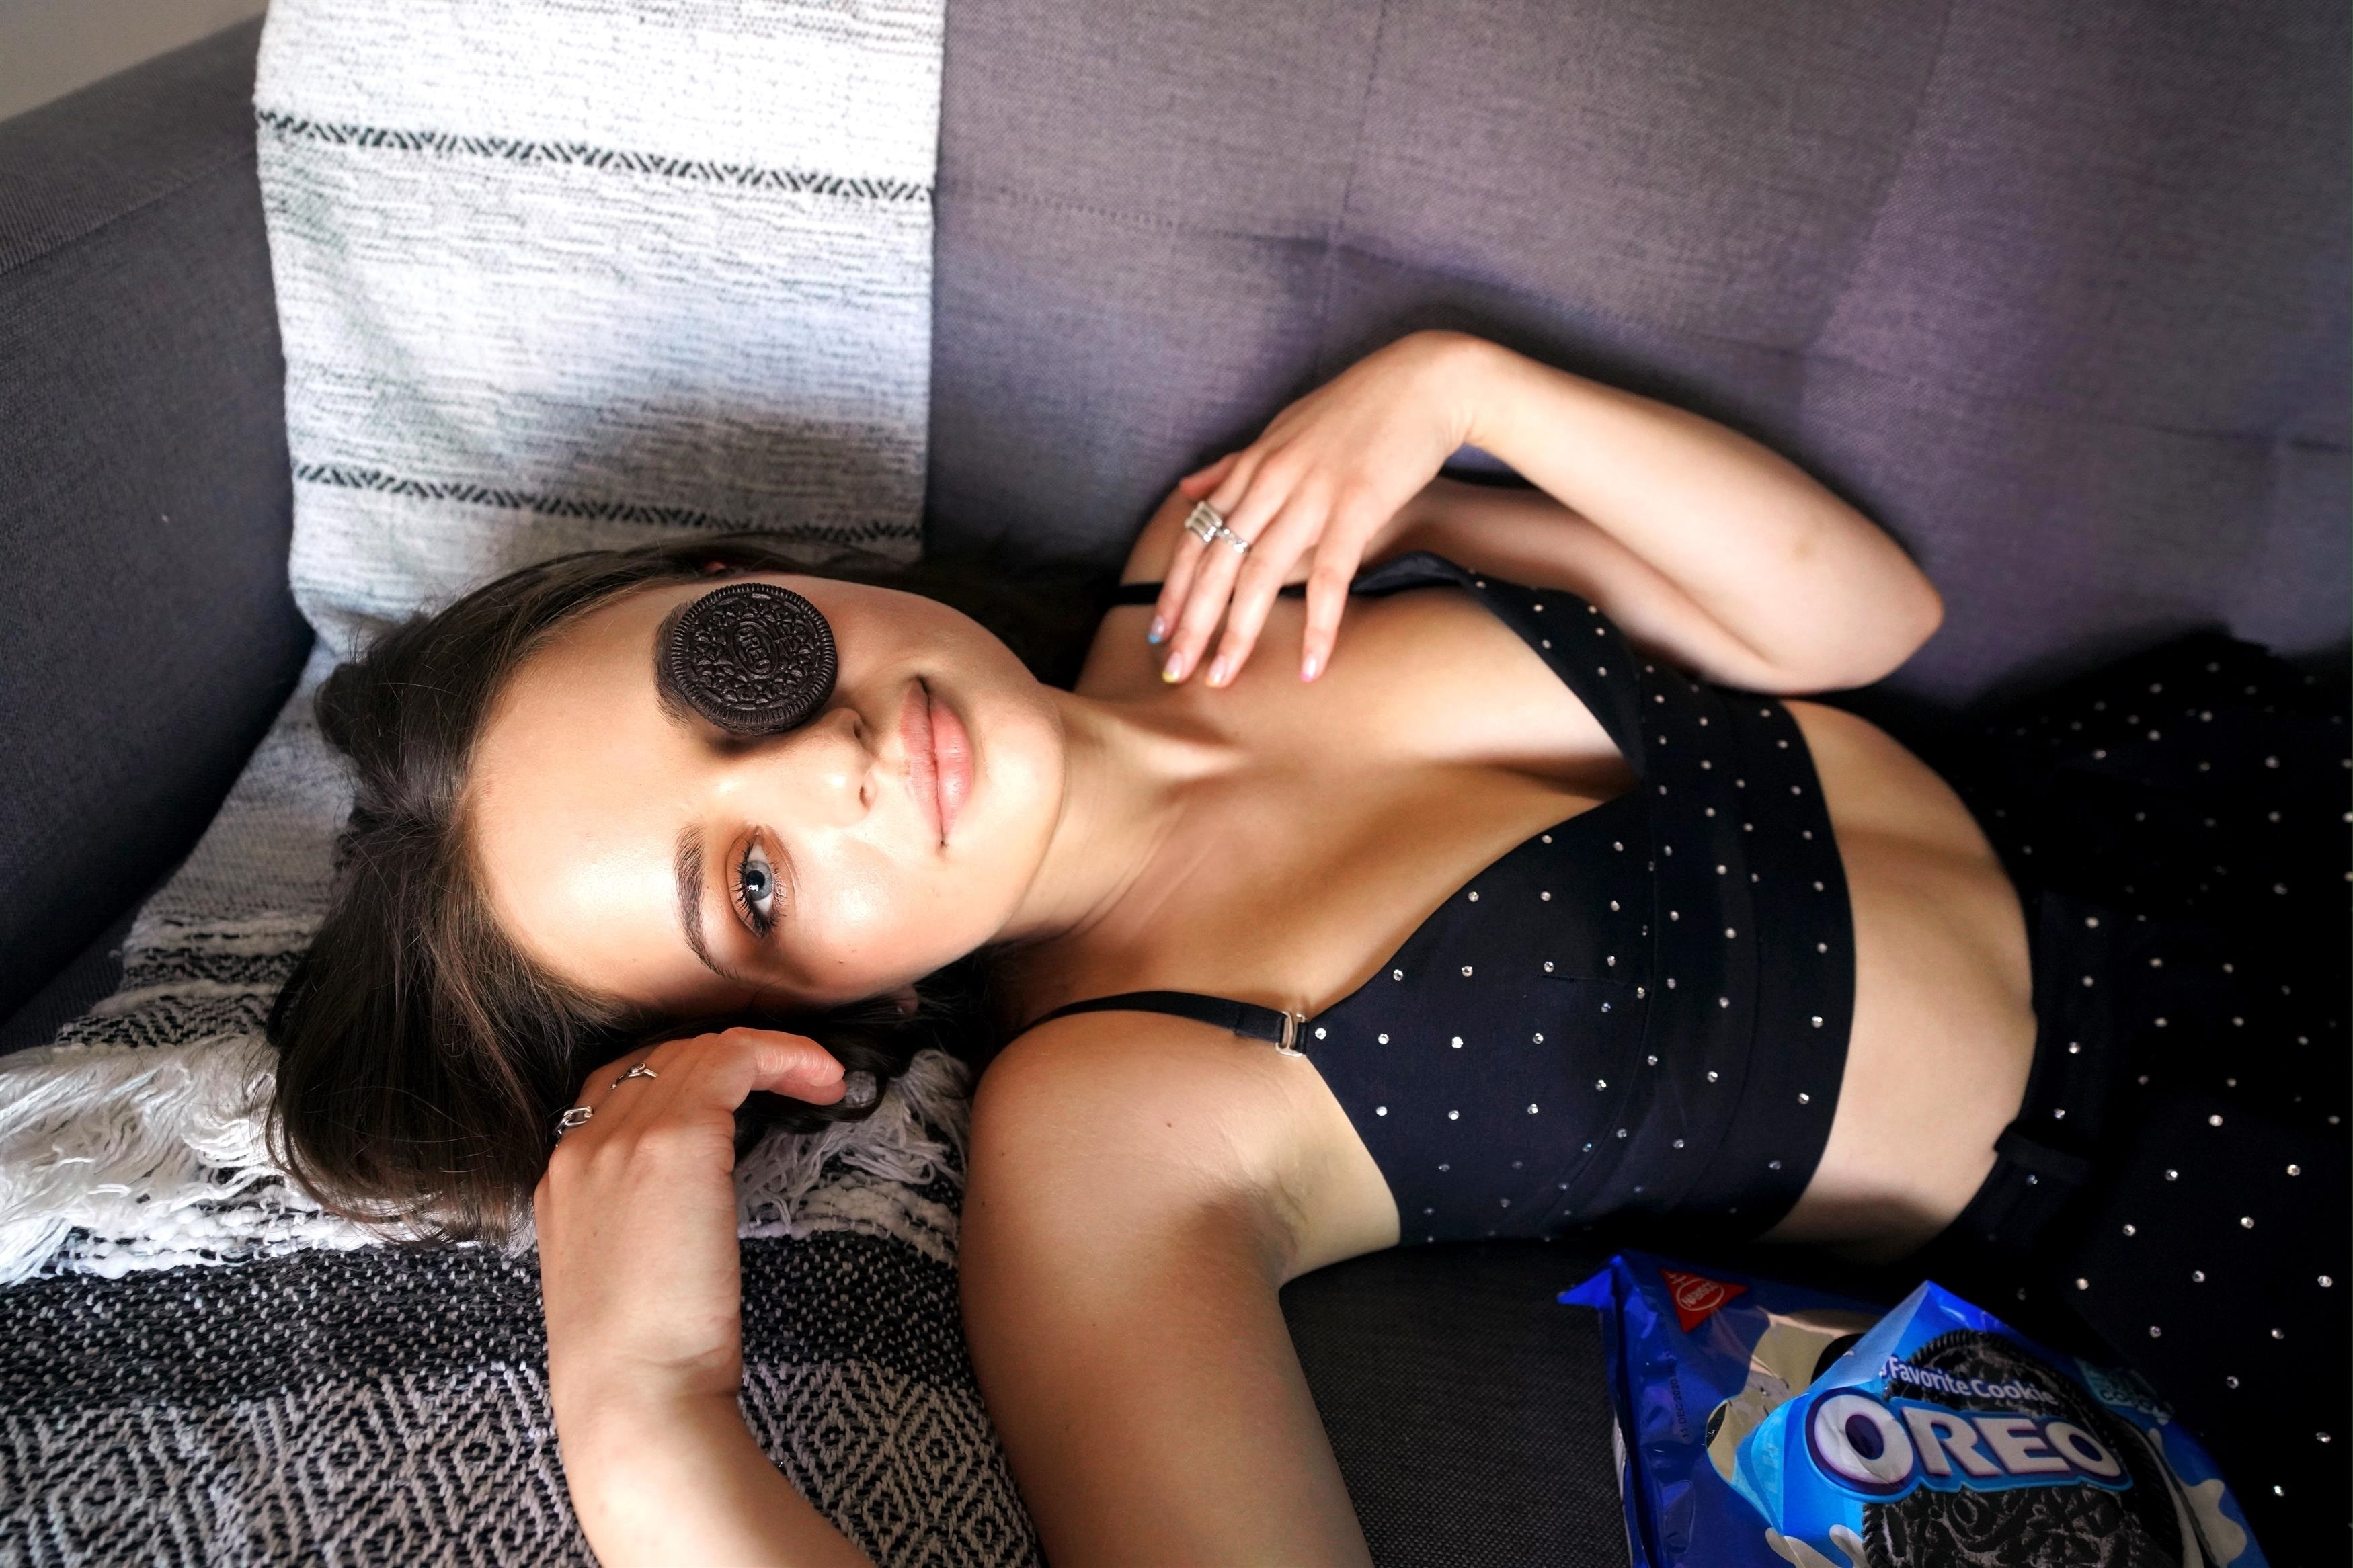 Photos n°11 : Joey King is Getting Sensual With an Oreo!